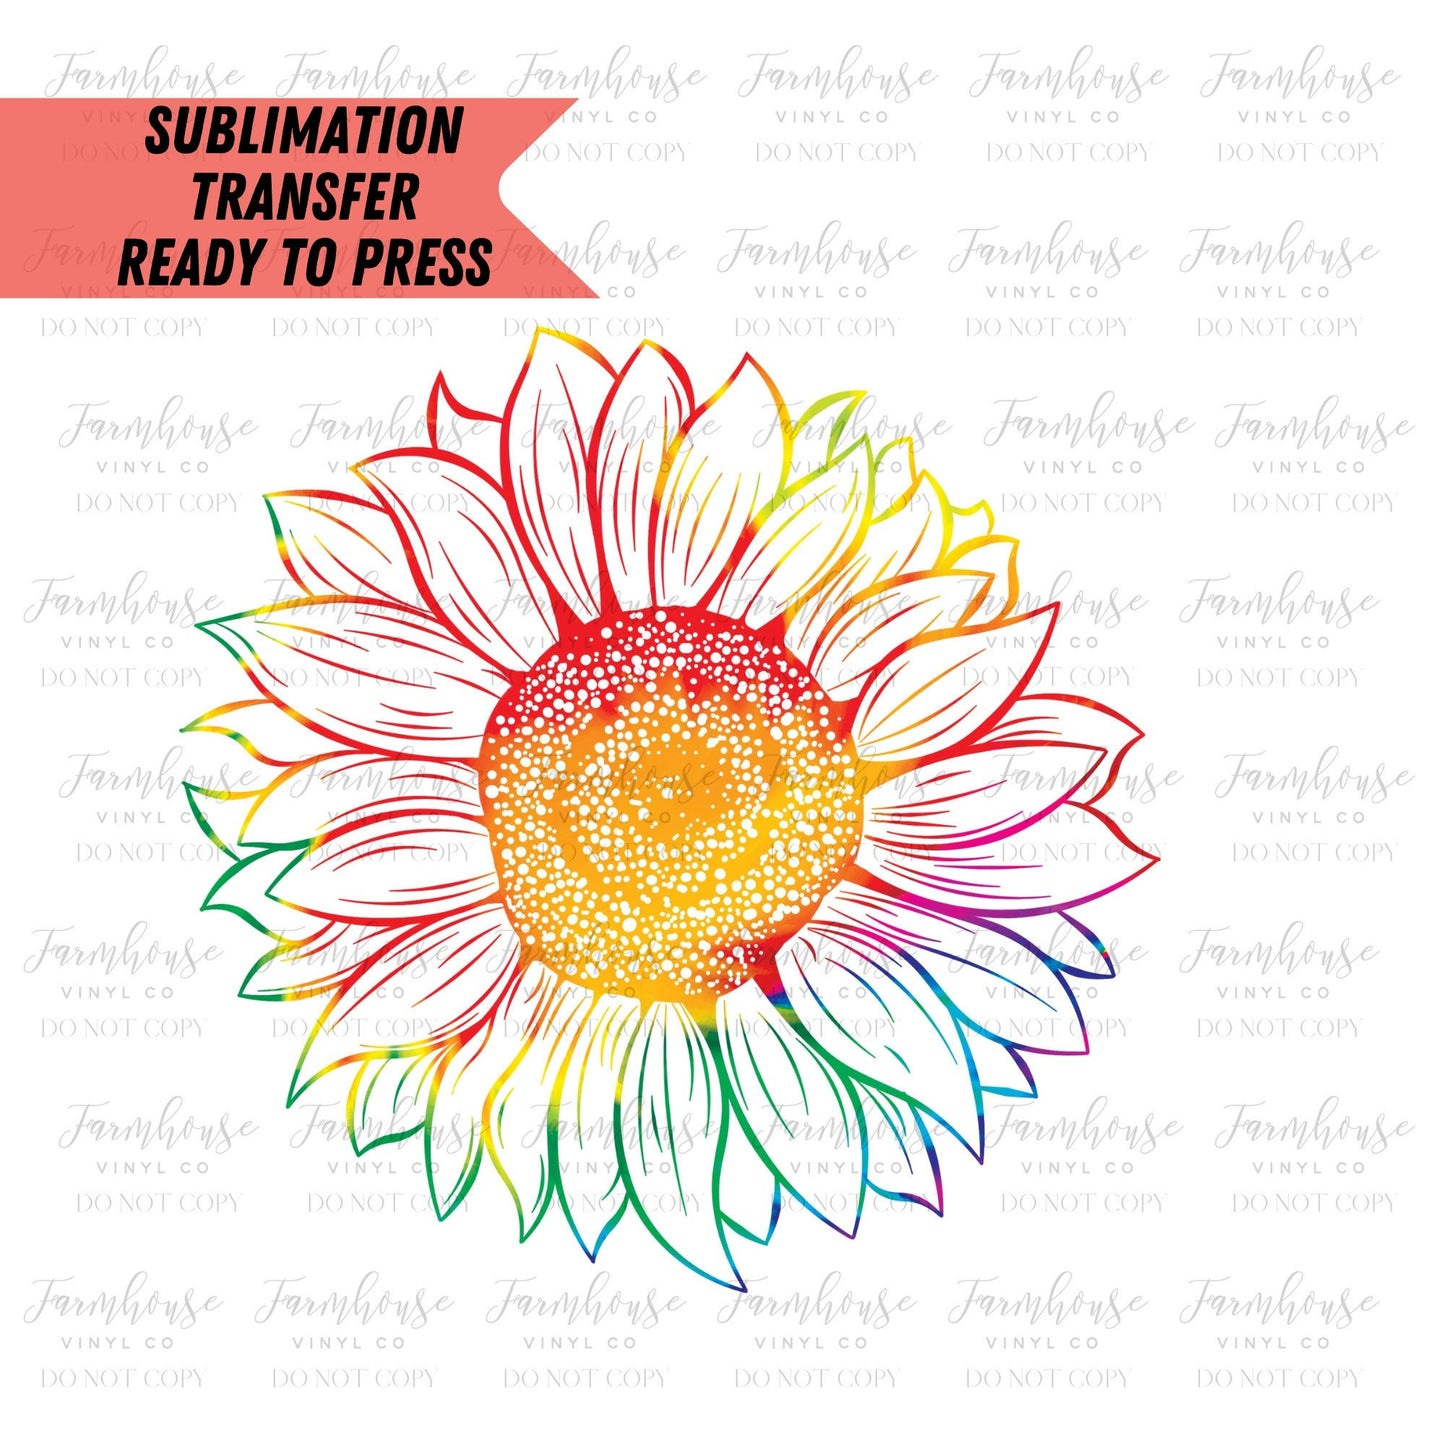 Tie Dye Sunflower, Floral Tie Dye Design, Ready To Press, Sublimation Transfers, Transfer Ready To Press, Heat Transfer Design Retro Hip - Farmhouse Vinyl Co